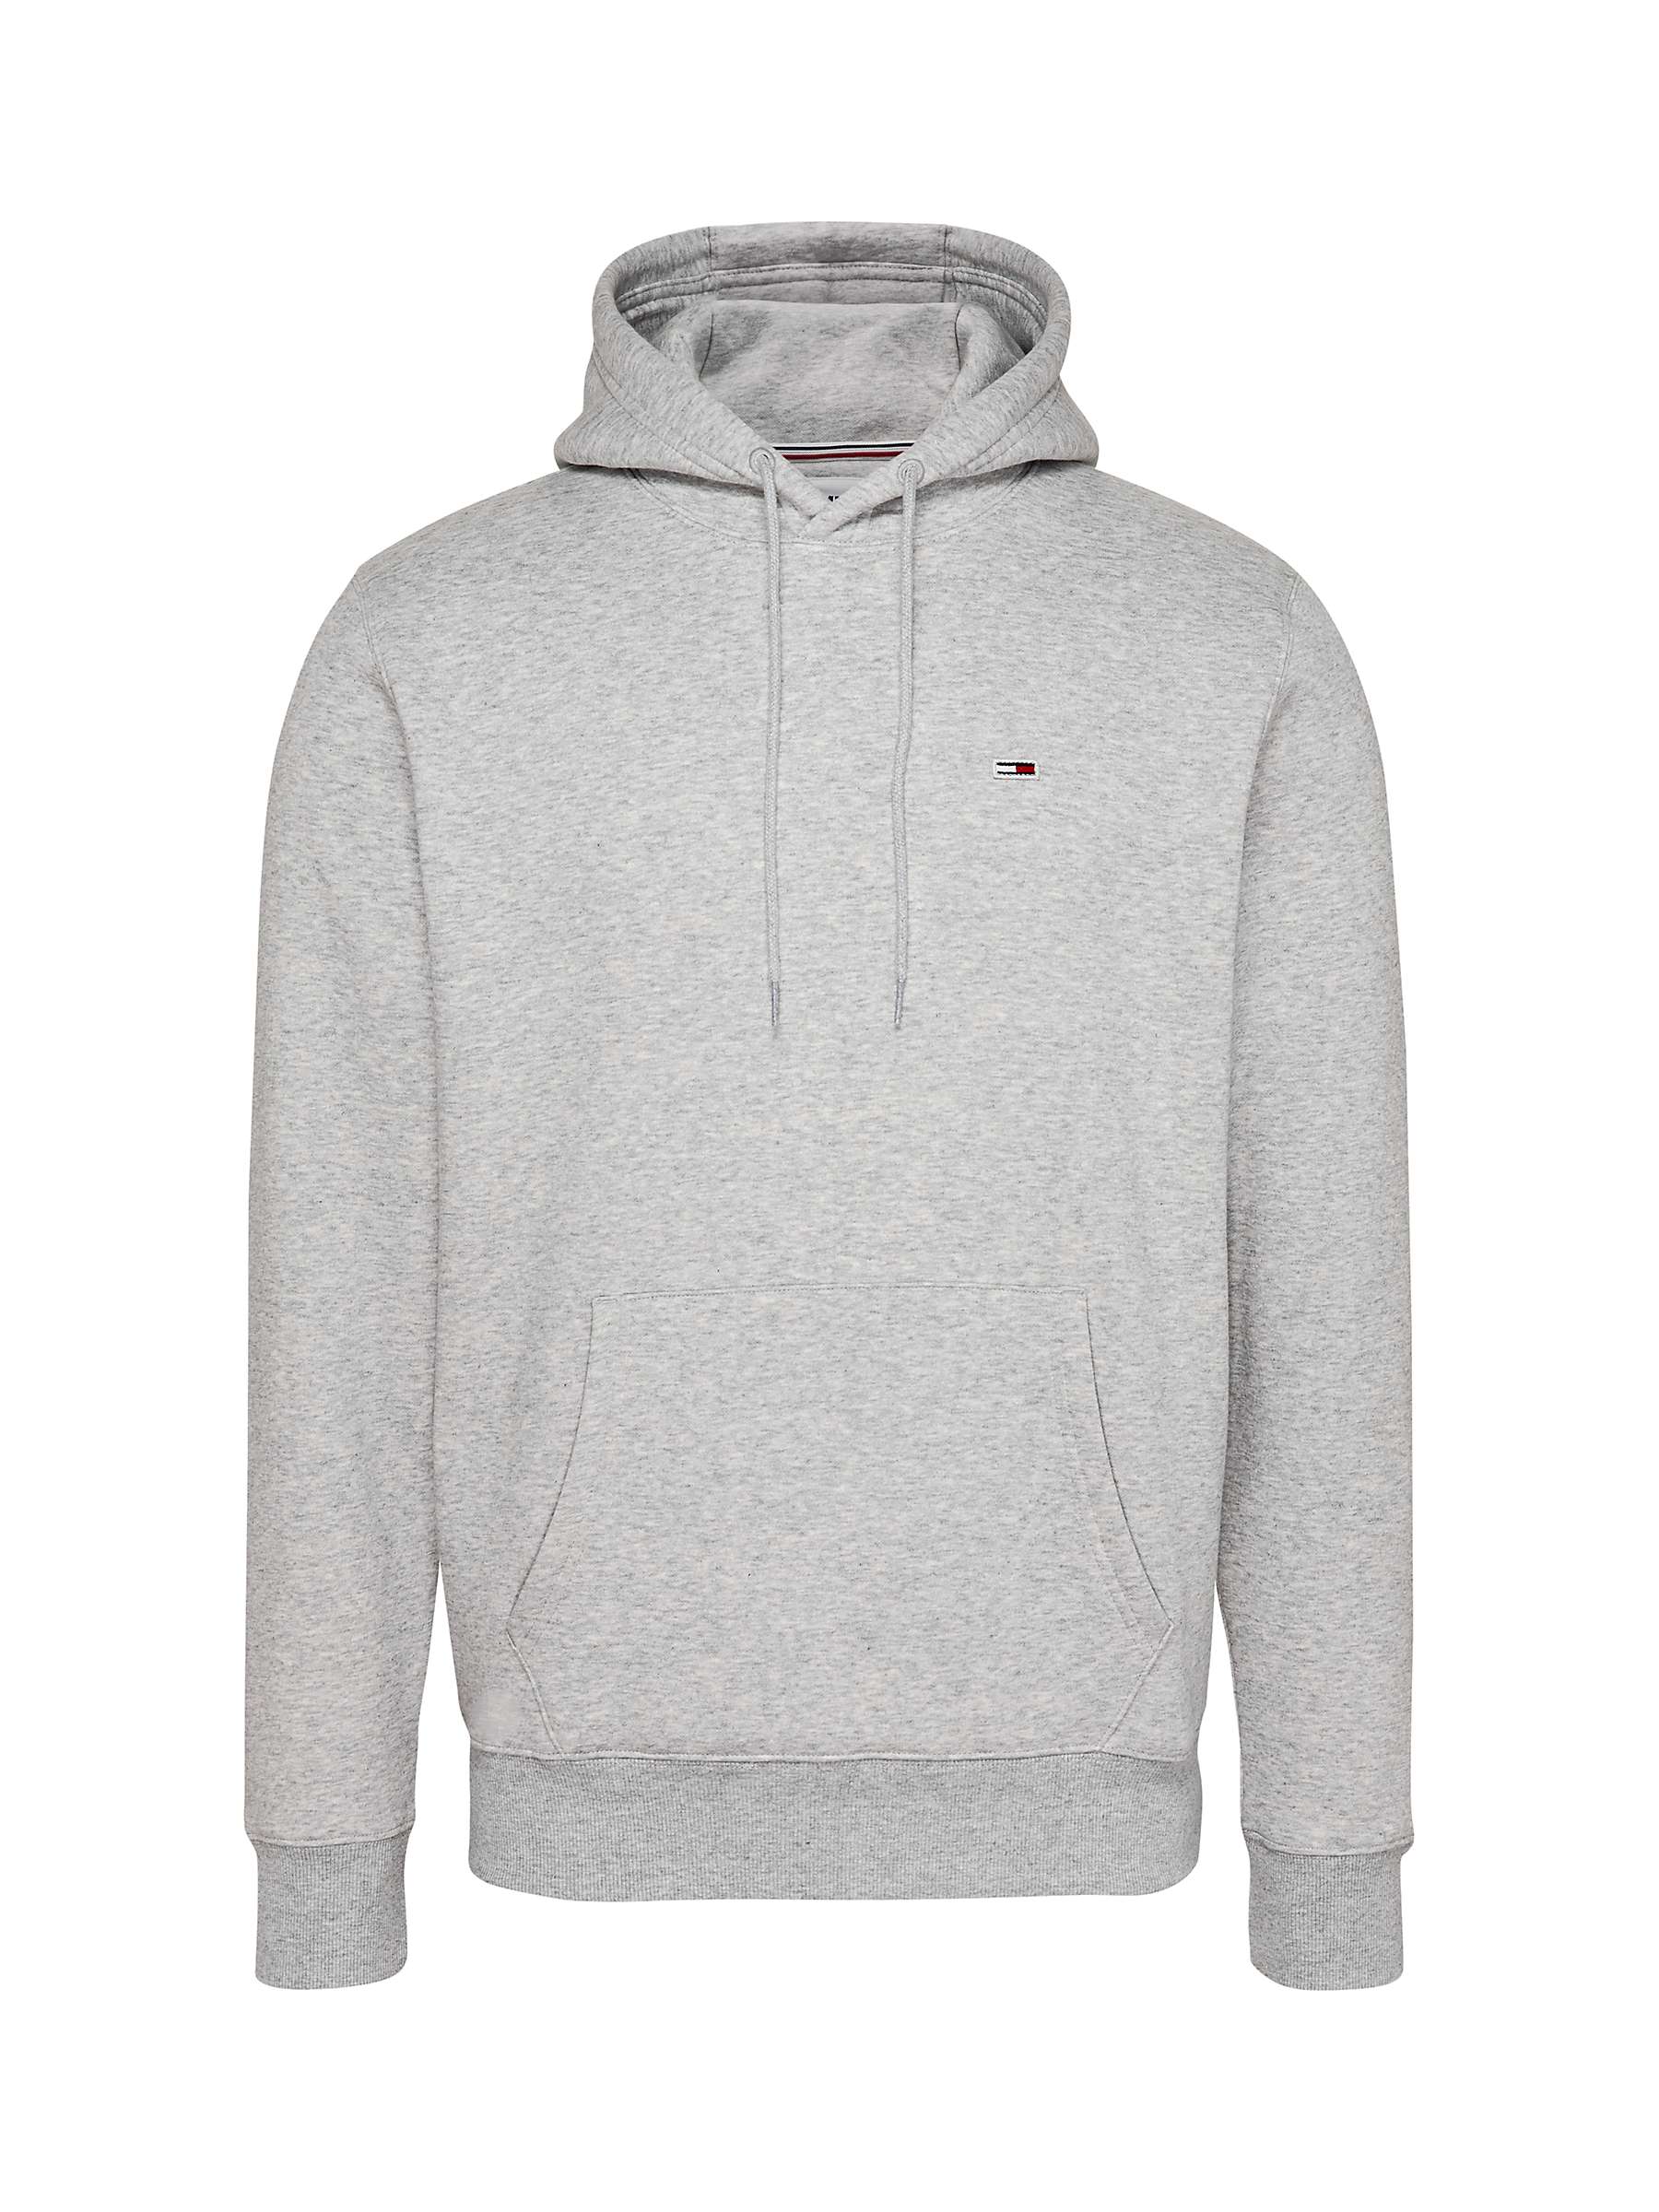 Buy Tommy Hilfiger Small Flag Hoodie, Light Grey Online at johnlewis.com